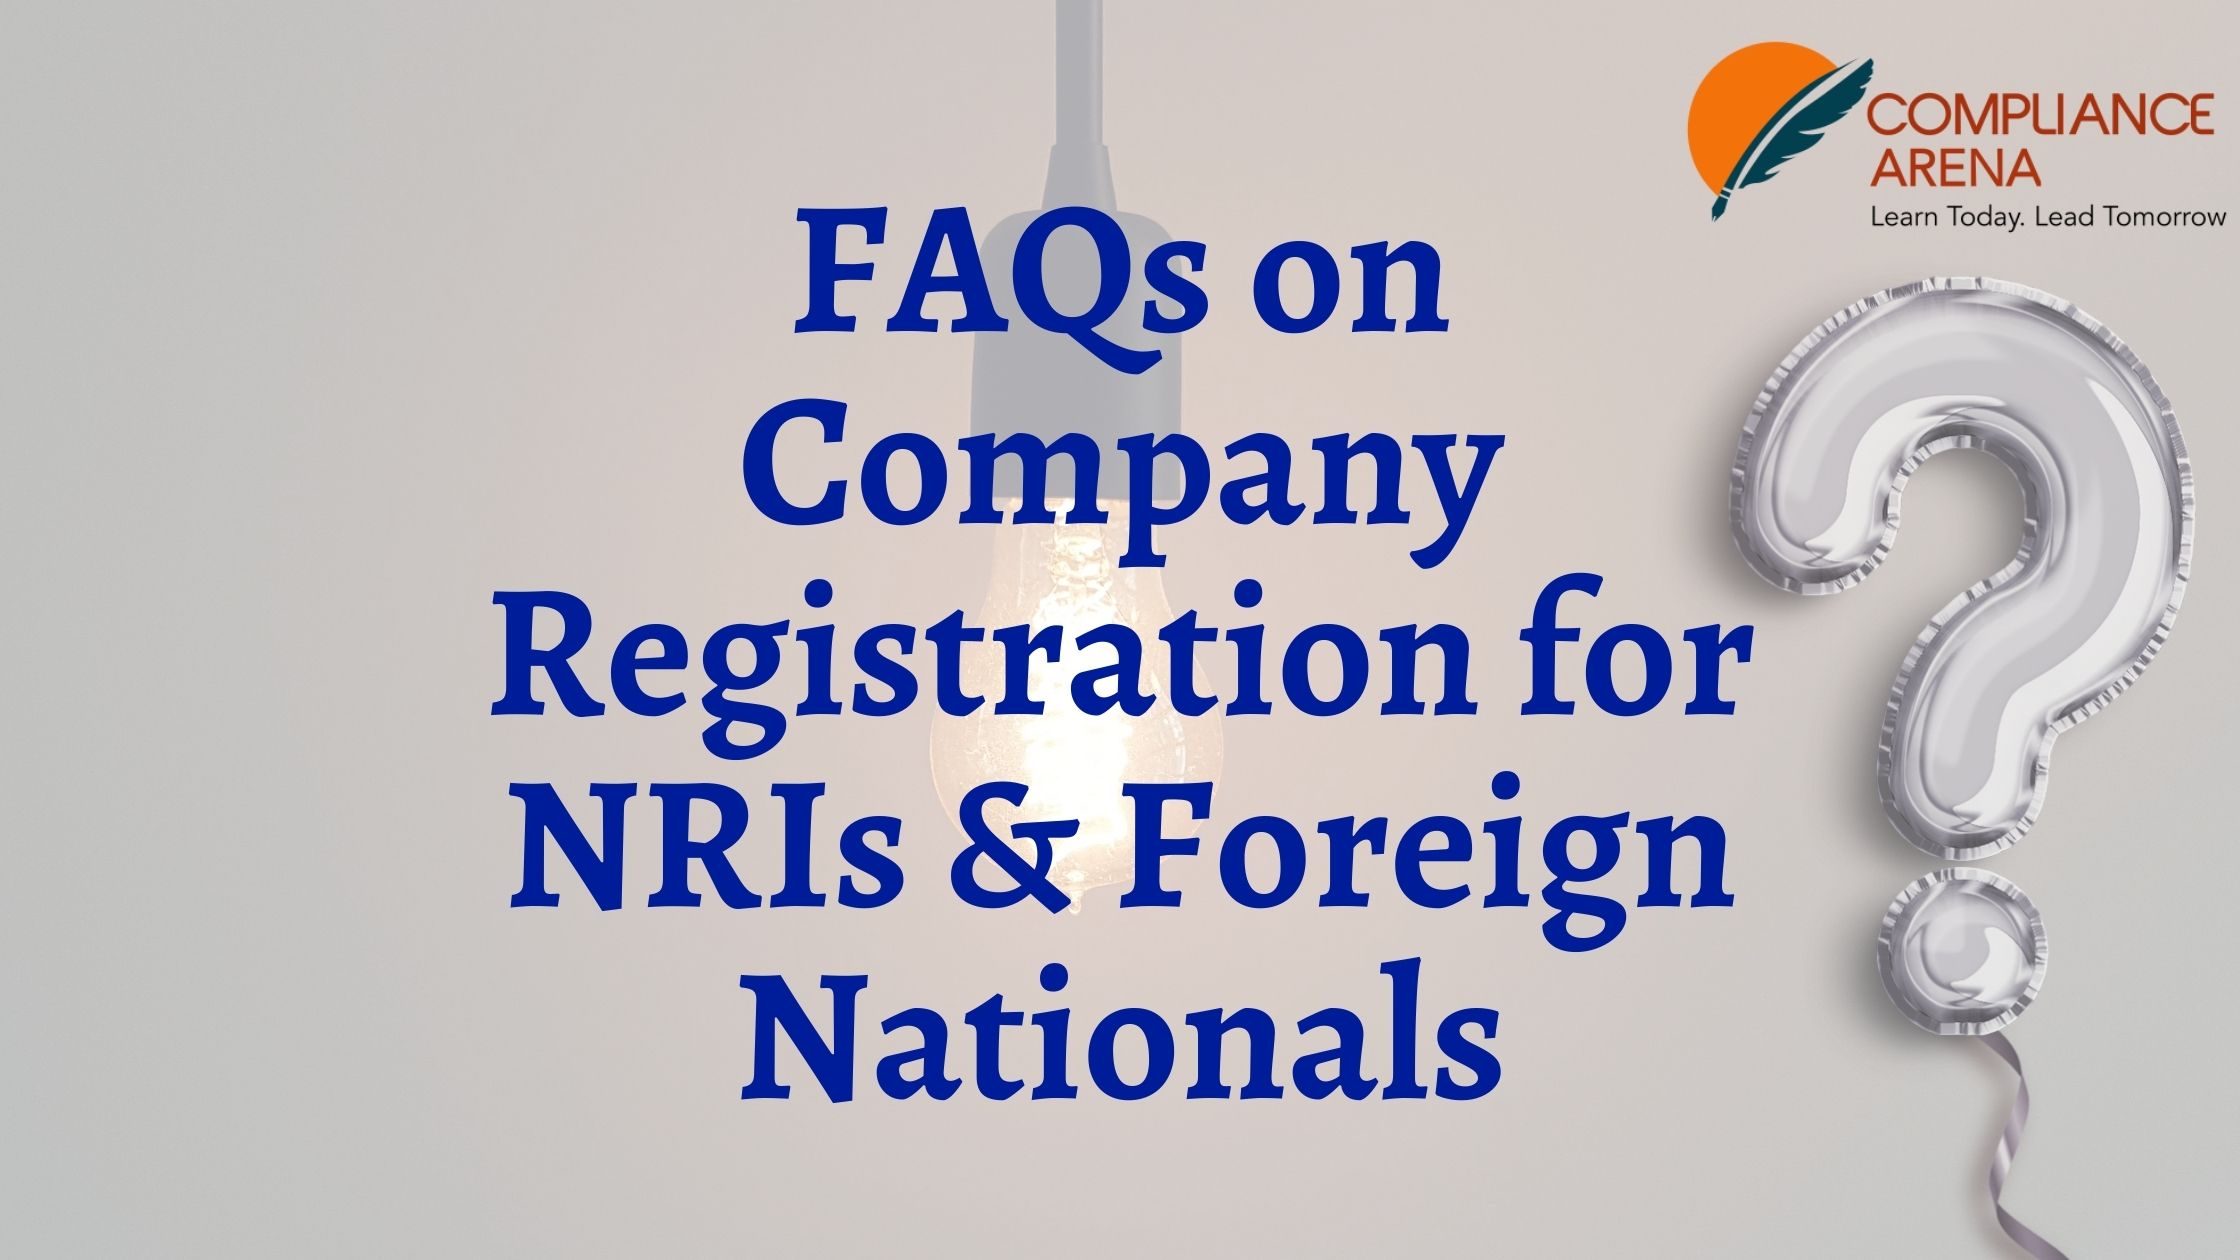 FAQs on Company Registration for NRIs and Foreign Nationals